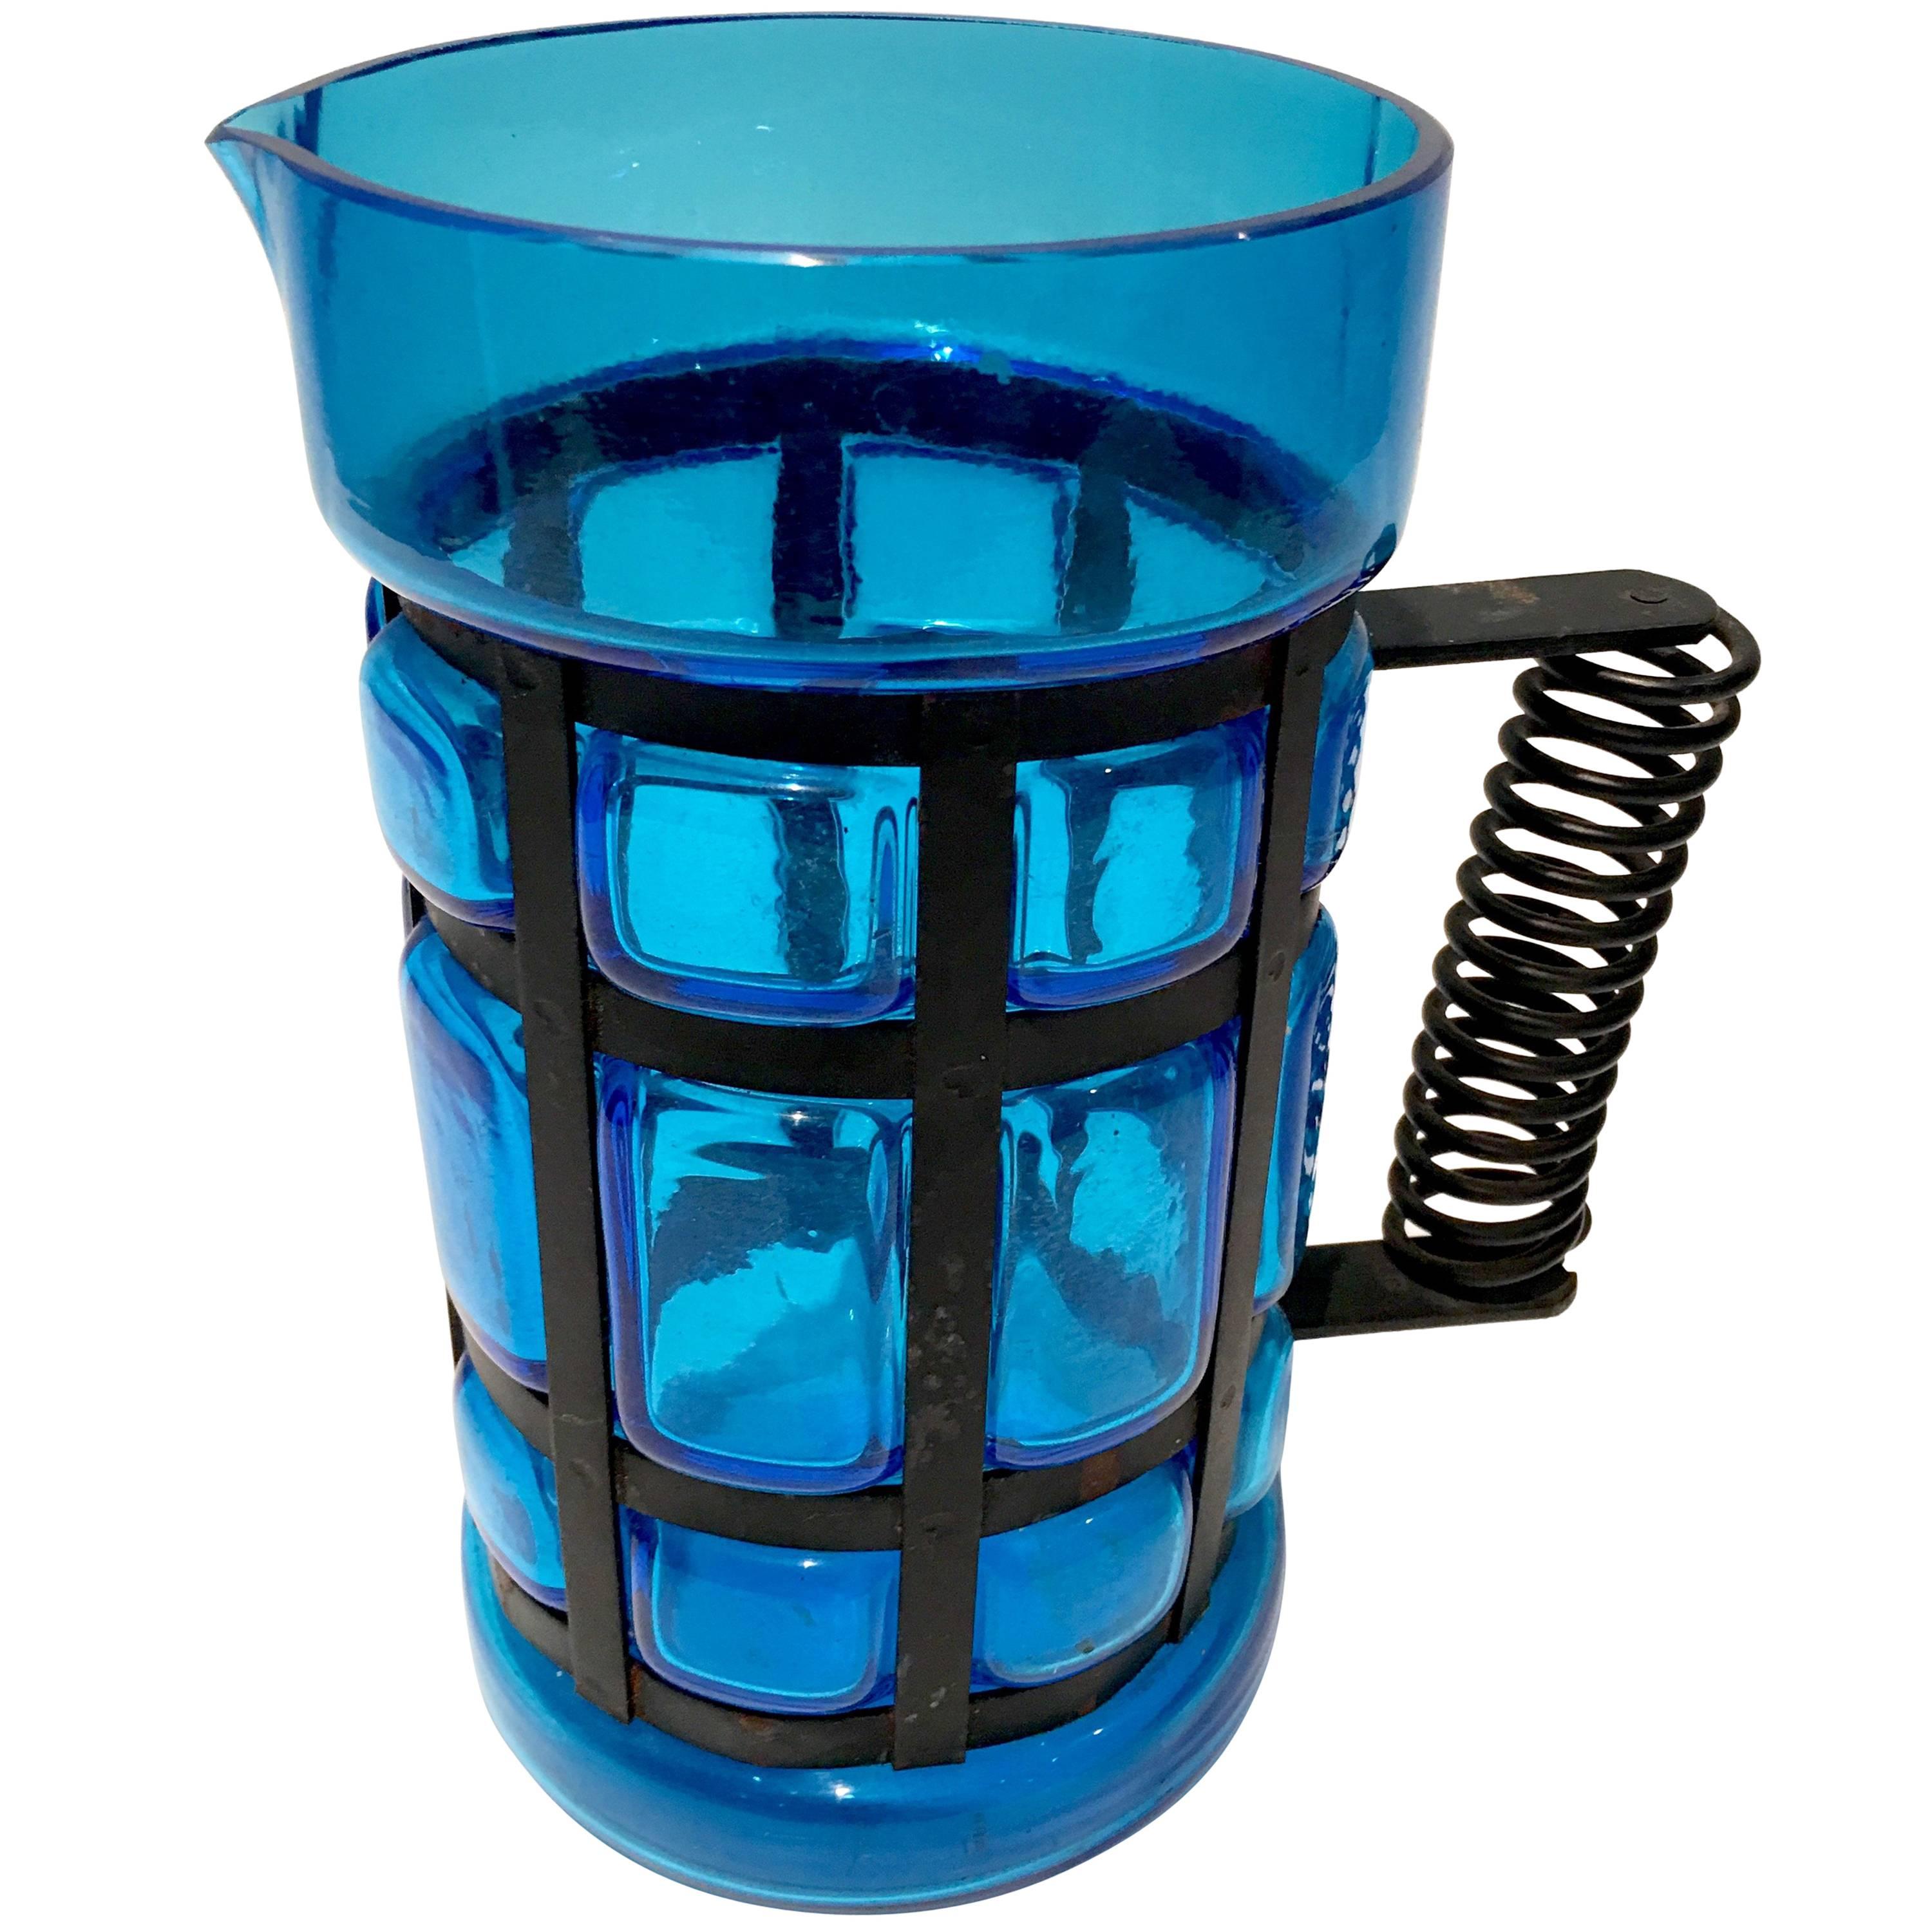 Mid- 20th Century Spanish peacock blue blown glass and iron caged handled pitcher. Brilliant blue glass with black cast iron. The handle has a spiral detail and the body is pillowed. Measure: Handle, 5